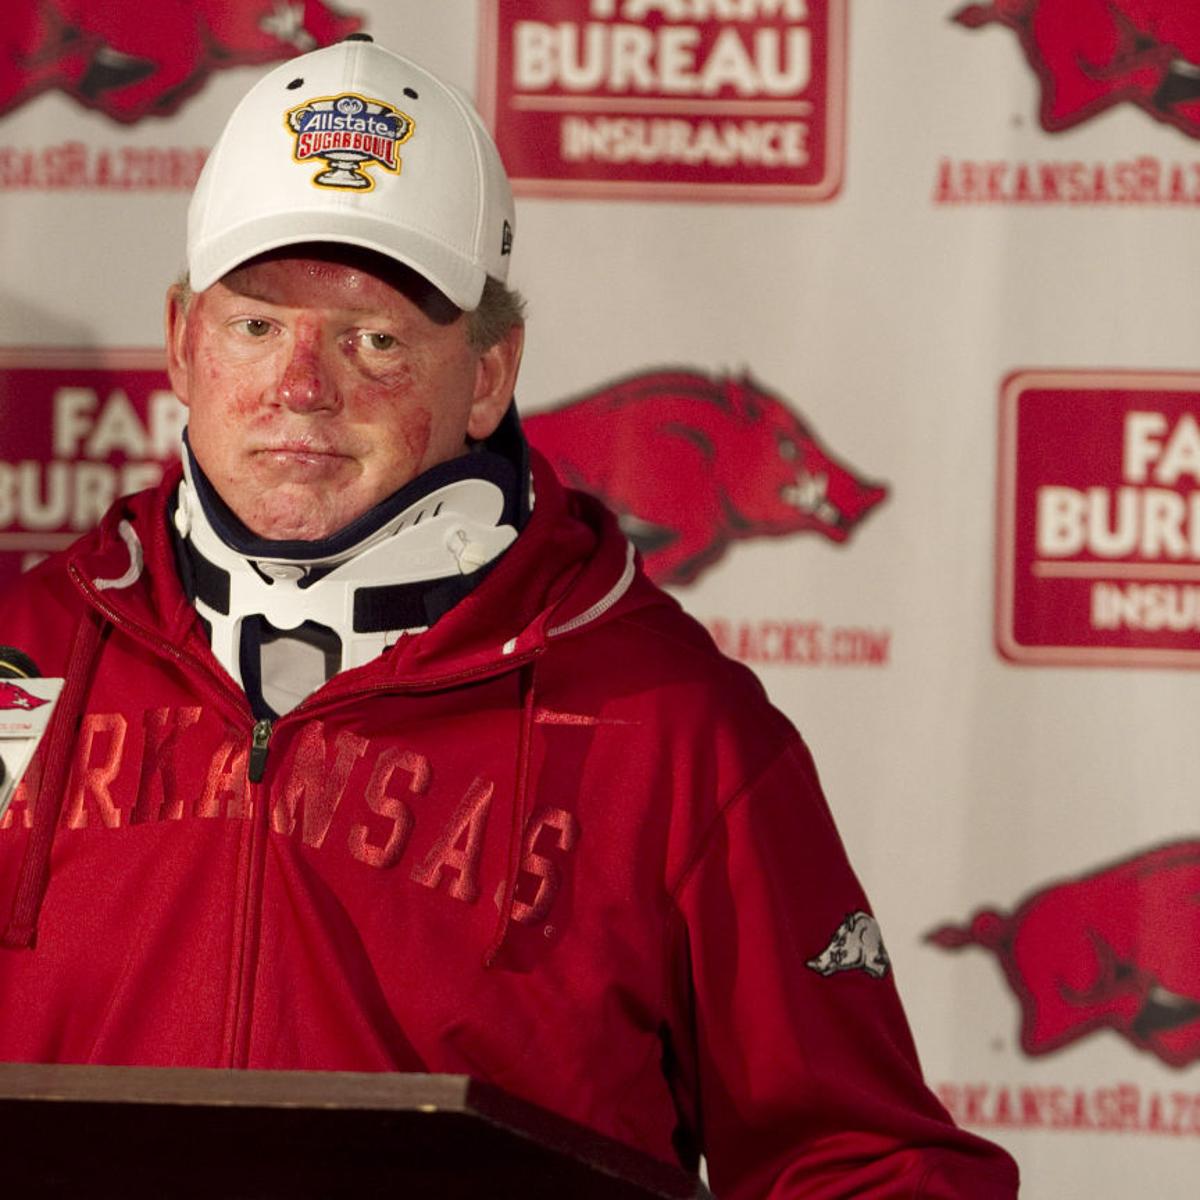 Arkansas football coach Bobby Petrino admits inappropriate relationship  after motorcycle accident | Sports 